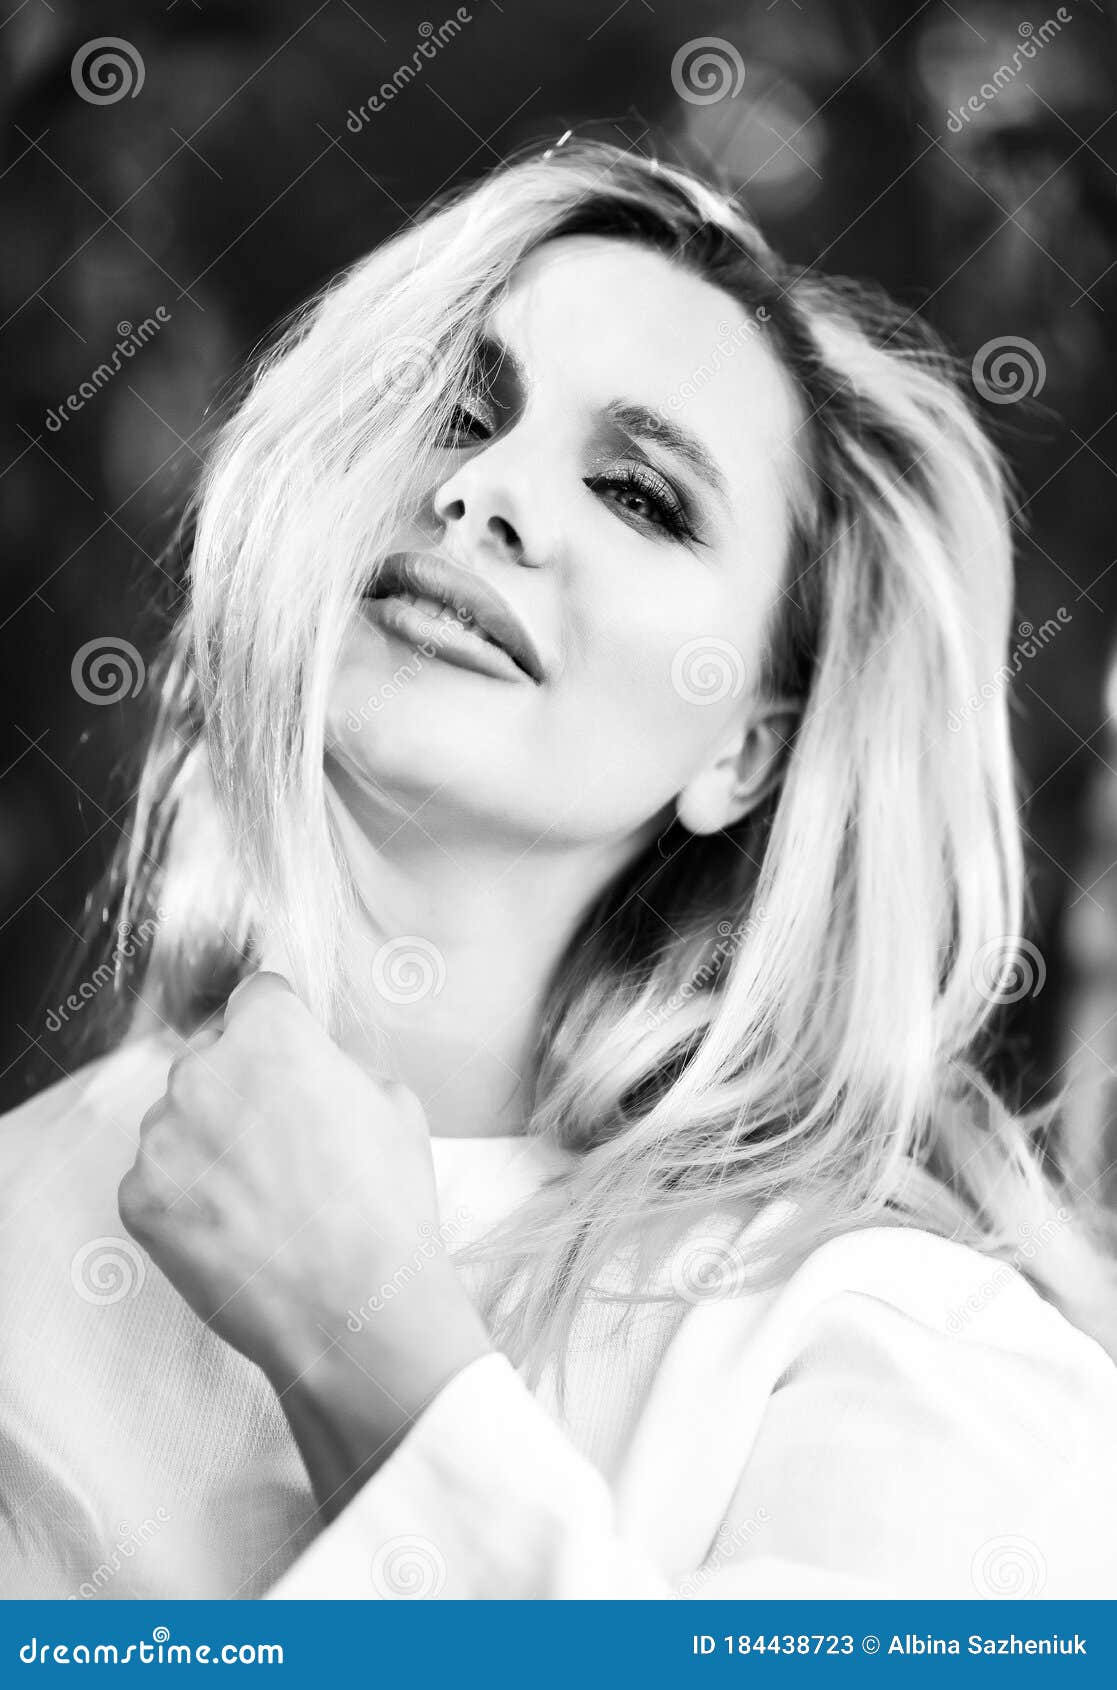 Close-up Black and White Vertical Portrait of Beautiful Blonde Sexual 30 Years Old Woman with Make-up, Wild Hair and Hand Near Stock Image